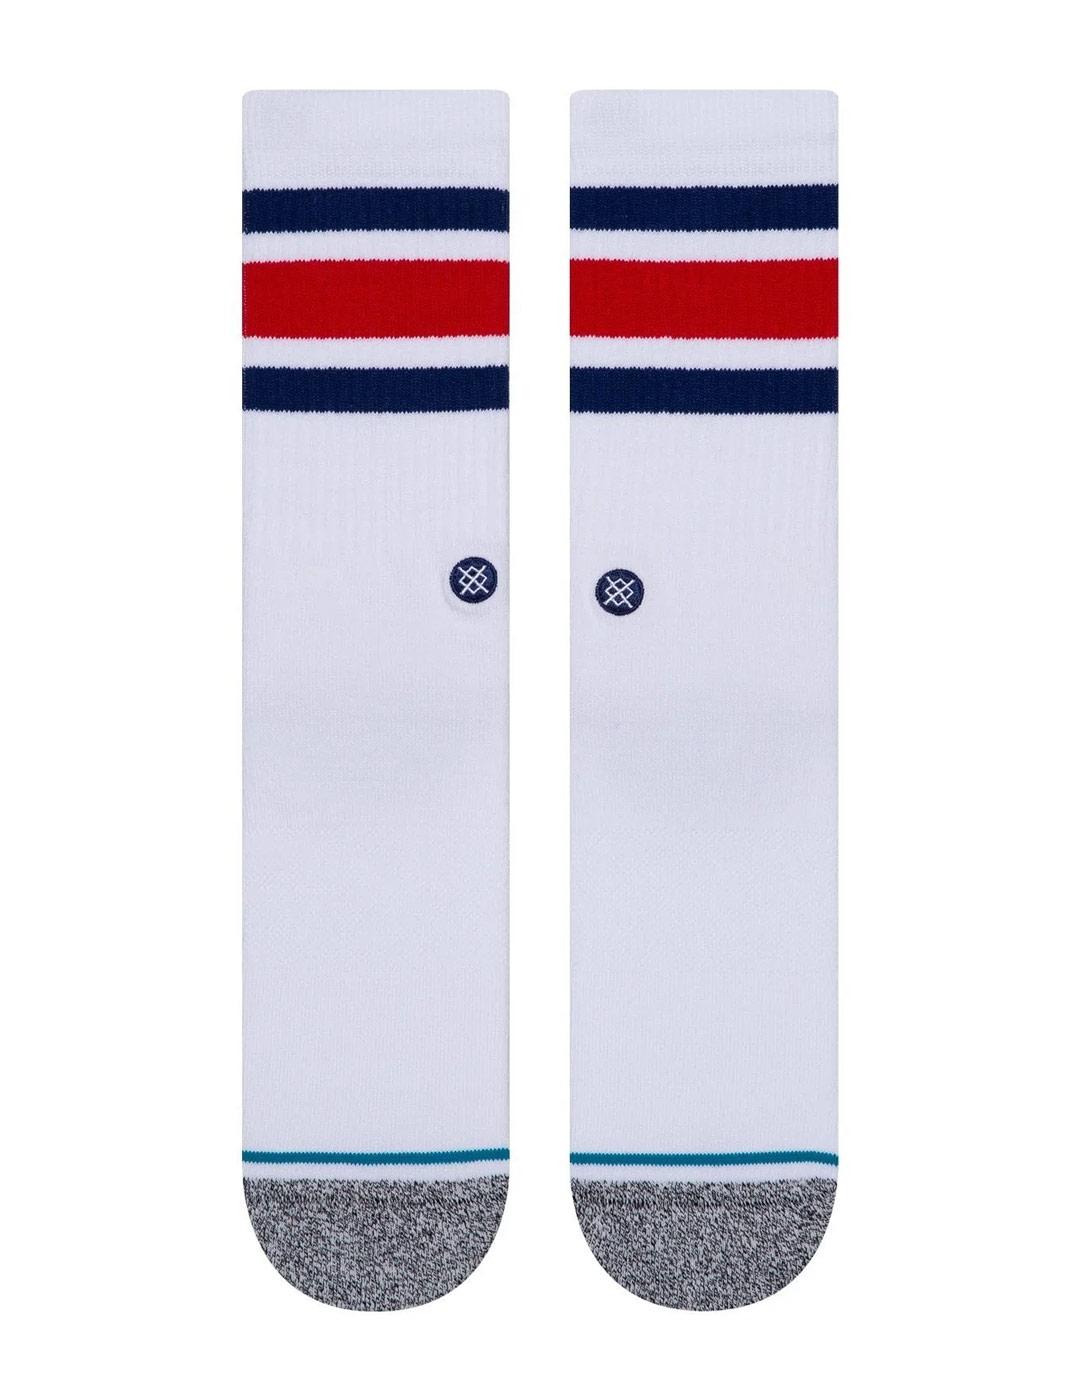 Chaussettes Stance Boyd ST Blanc.